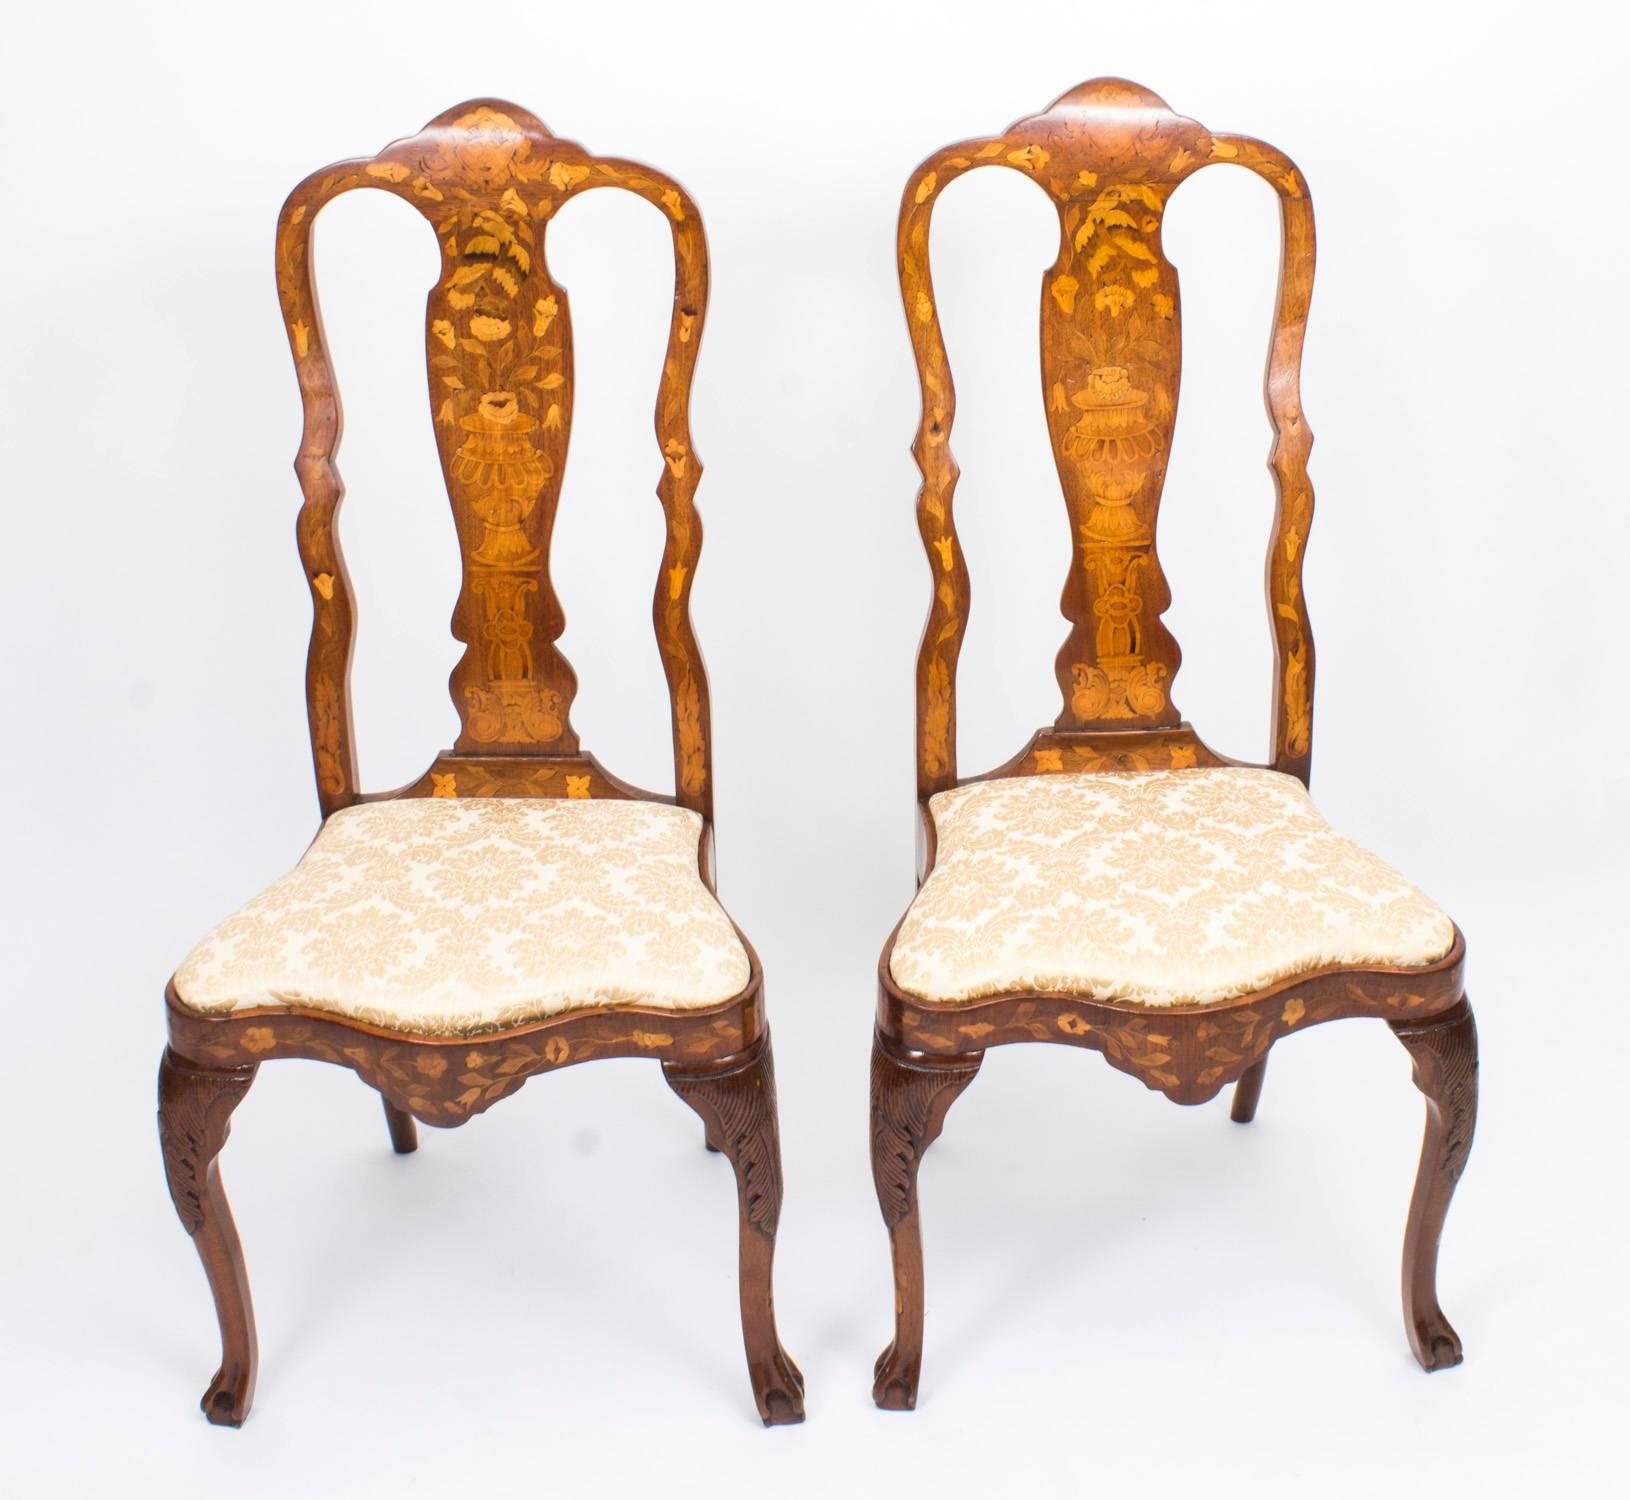 This is a beautiful and rare antique set of eight high backed Dutch walnut and floral marquetry dining chairs. The set compromises two armchairs and six side chairs, all circa 1780 in date. The chairs have been skillfully crafted from solid walnut